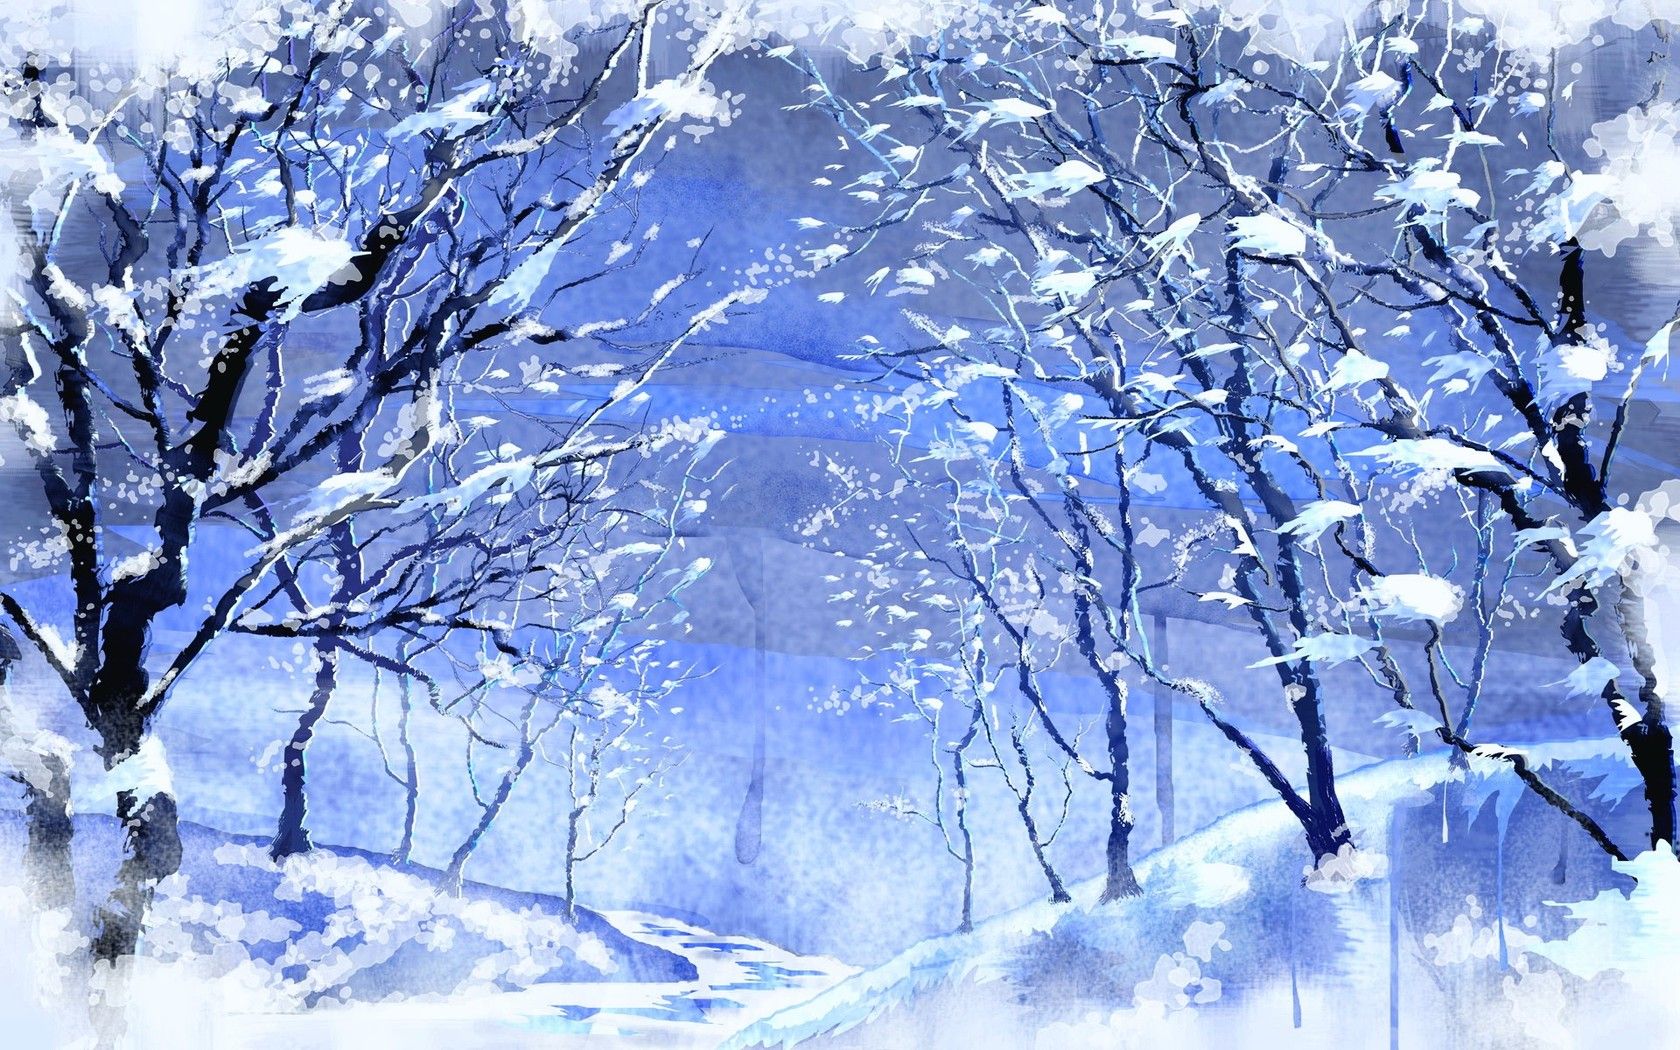 80 Anime Winter Background Stock Video Footage  4K and HD Video Clips   Shutterstock